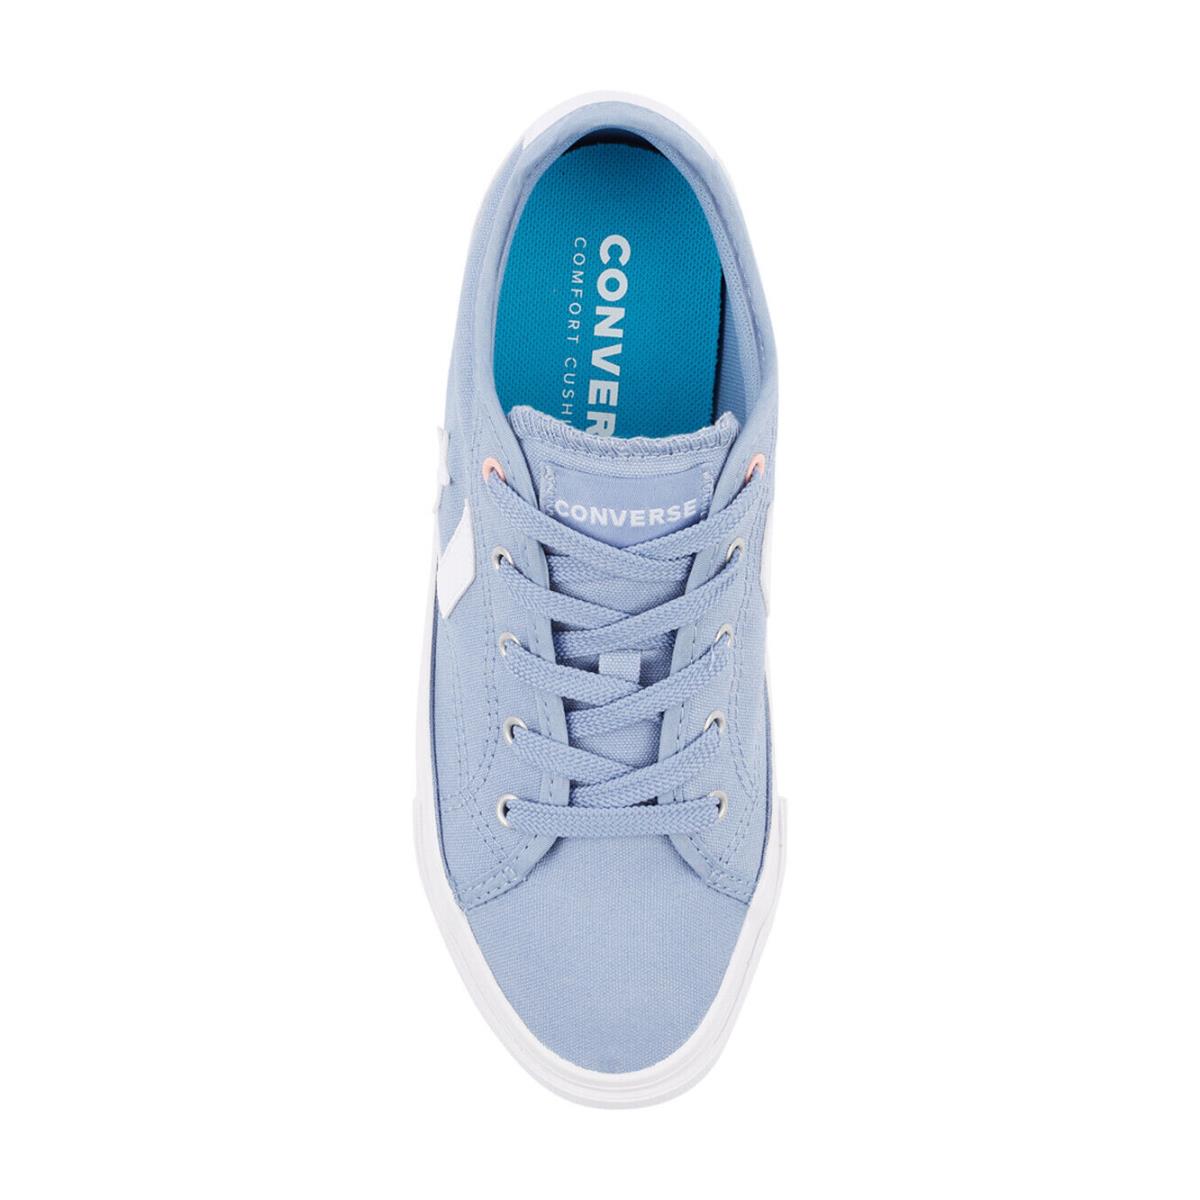 Converse One Star OX 564075 Unisex Light Blue/white Sneakers Shoes AMRS1417 5.5